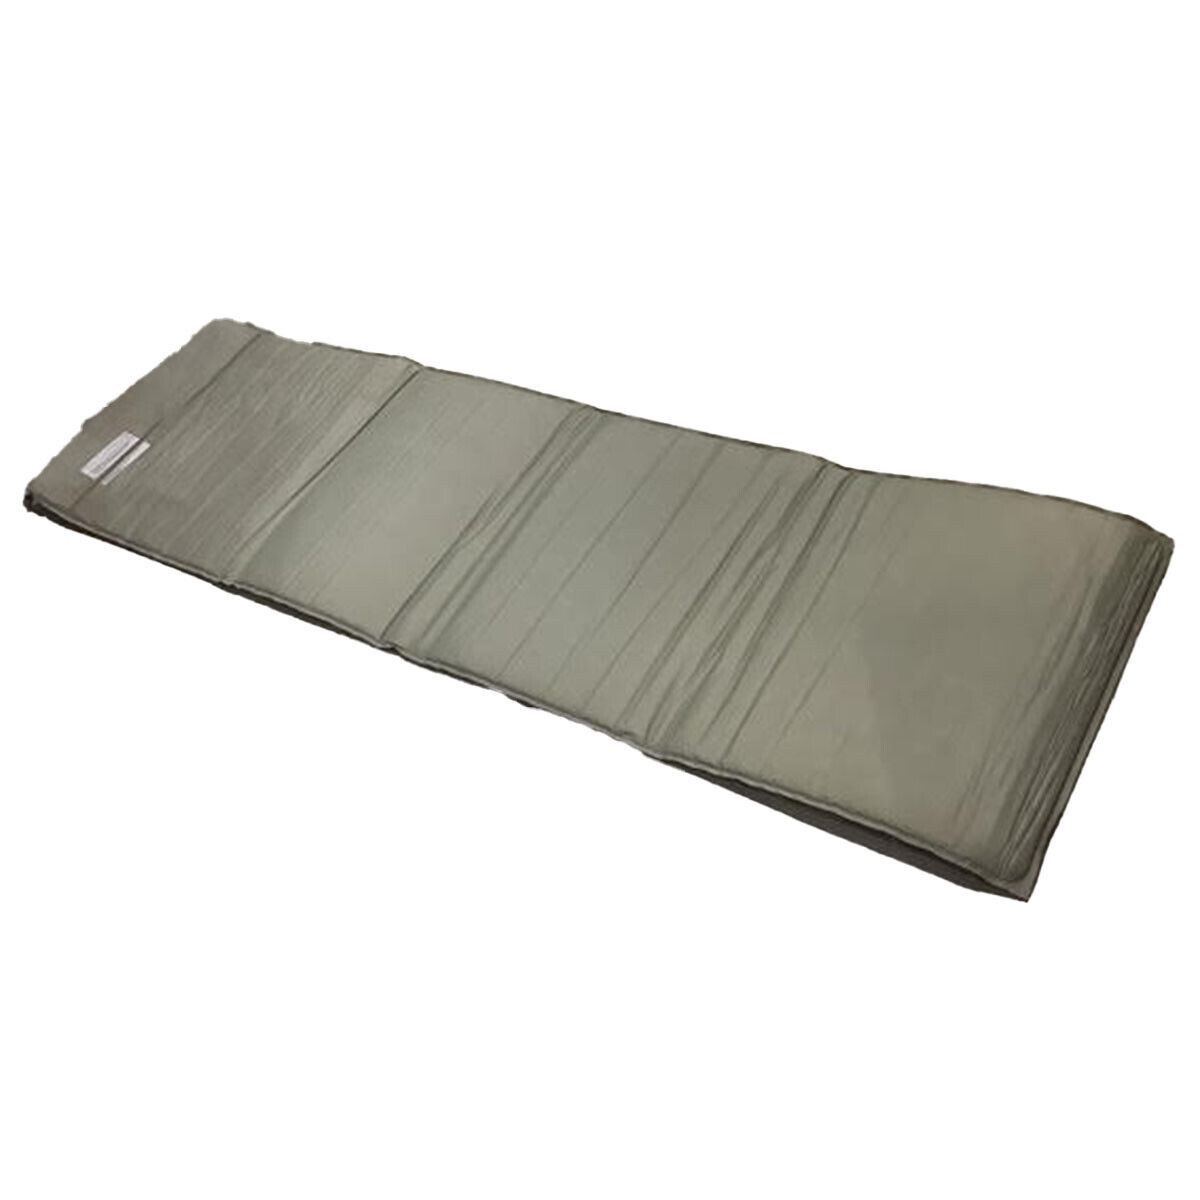 Military Self Inflate Sleeping Mat ThermaRest Cascade Foliage Green VGC